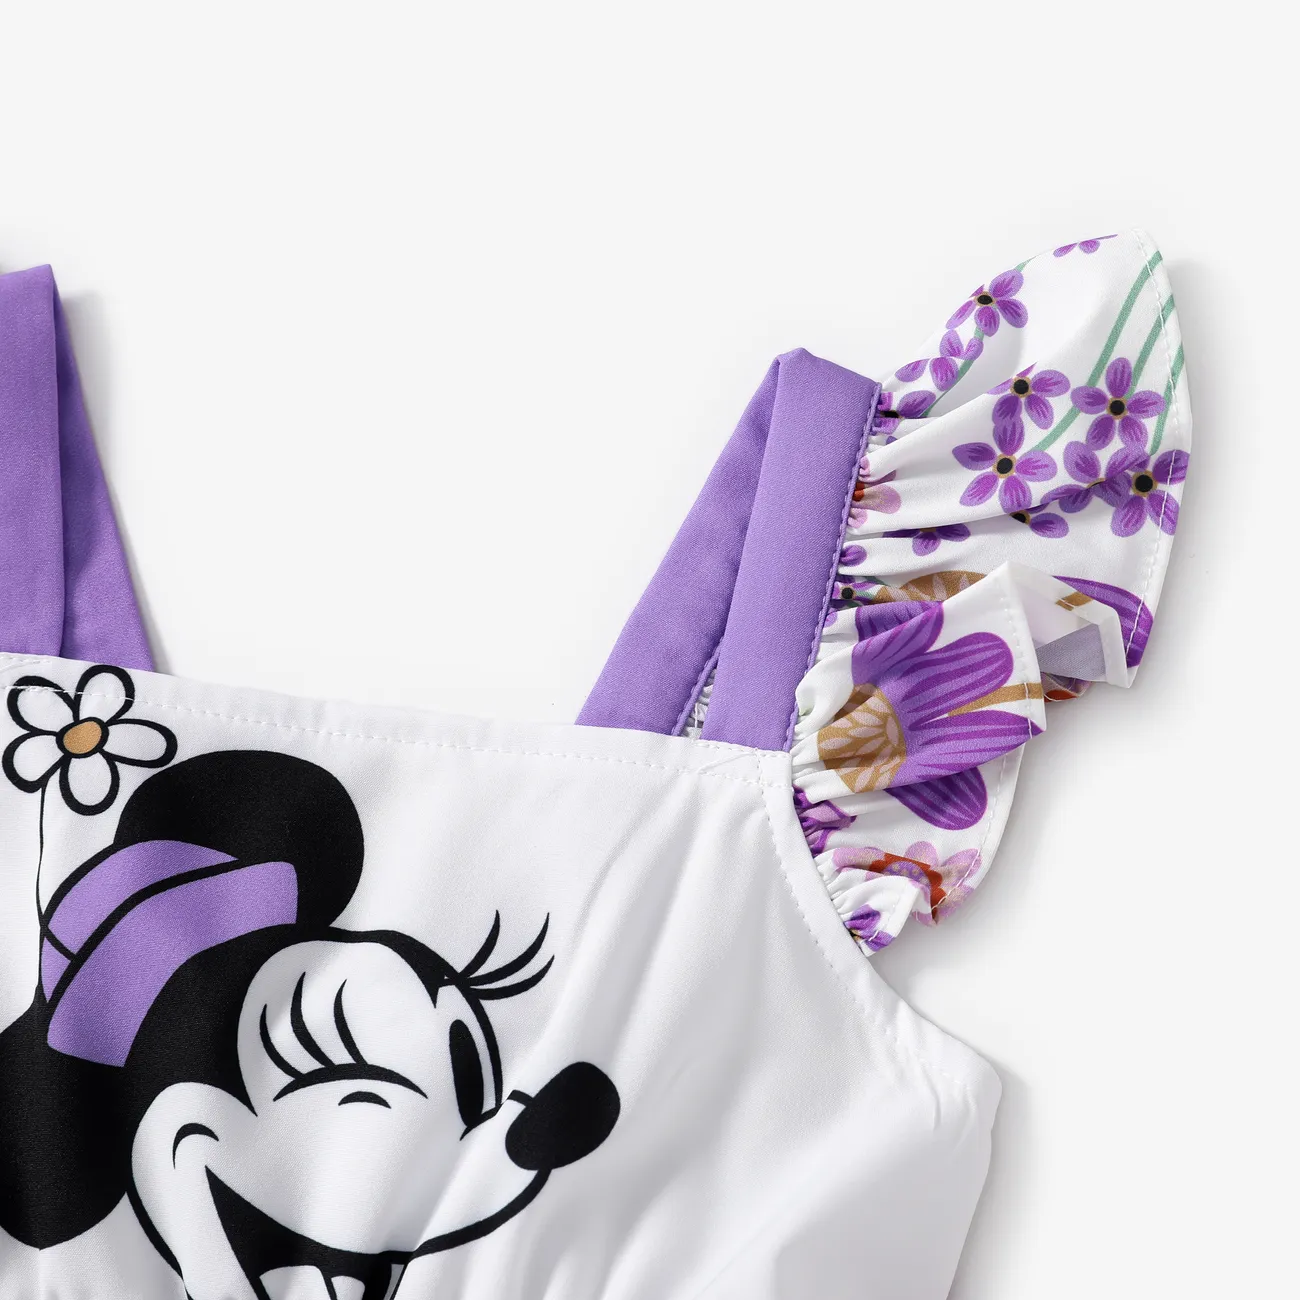 Disney Mickey and Friends Toddler Girls 1pc Floral All-over Print Ruffled/Flutter-sleeve Dress  Purple big image 1